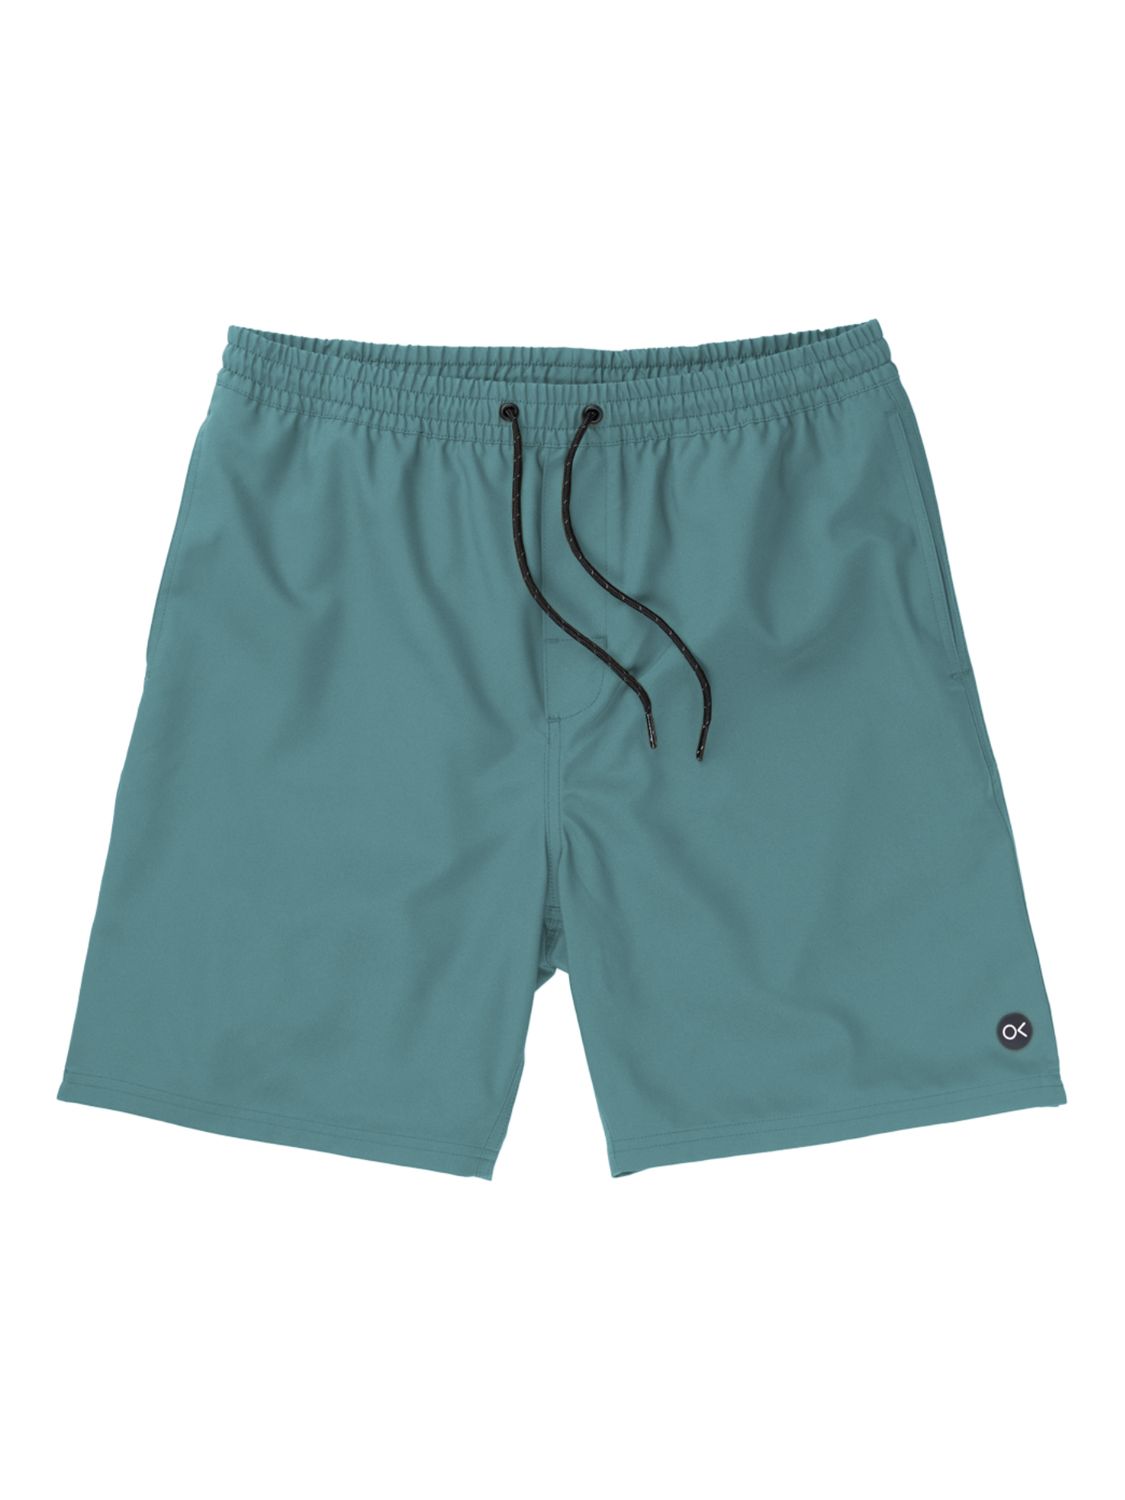 Outerknown Nomadic Volley Shorts, Blue, L